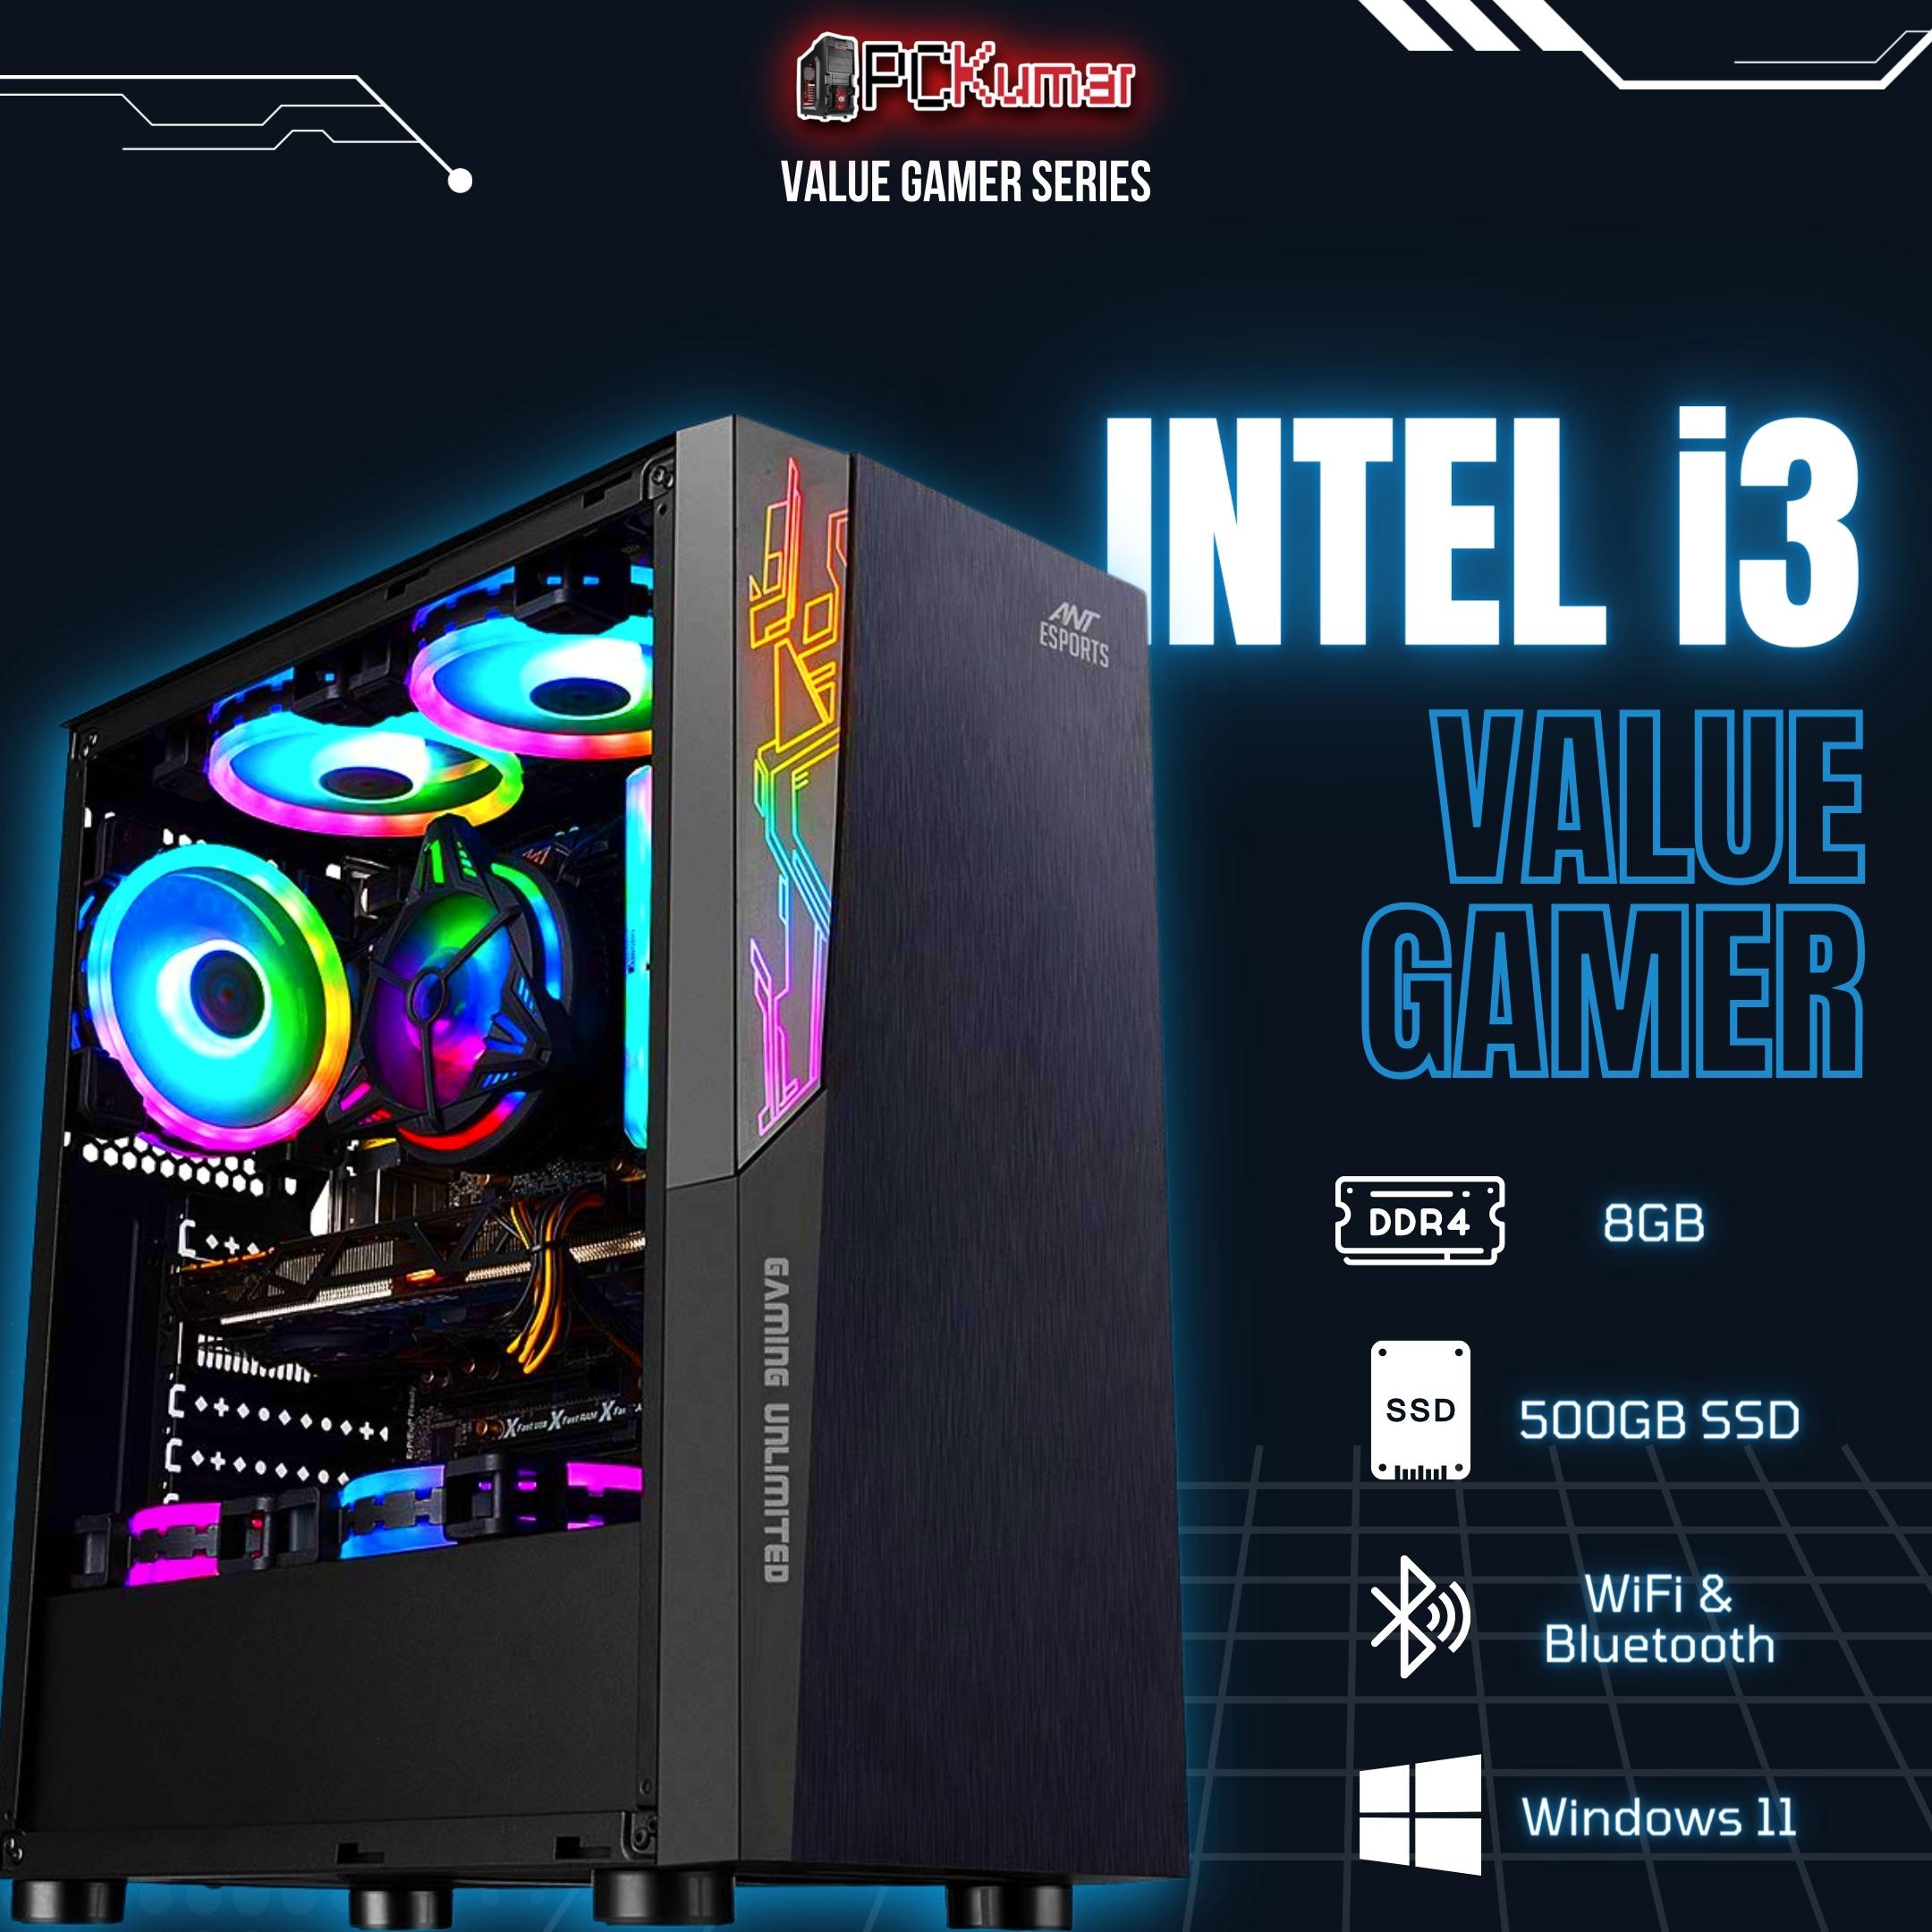 Value Gaming with Intel i3 + RX 550 4GB